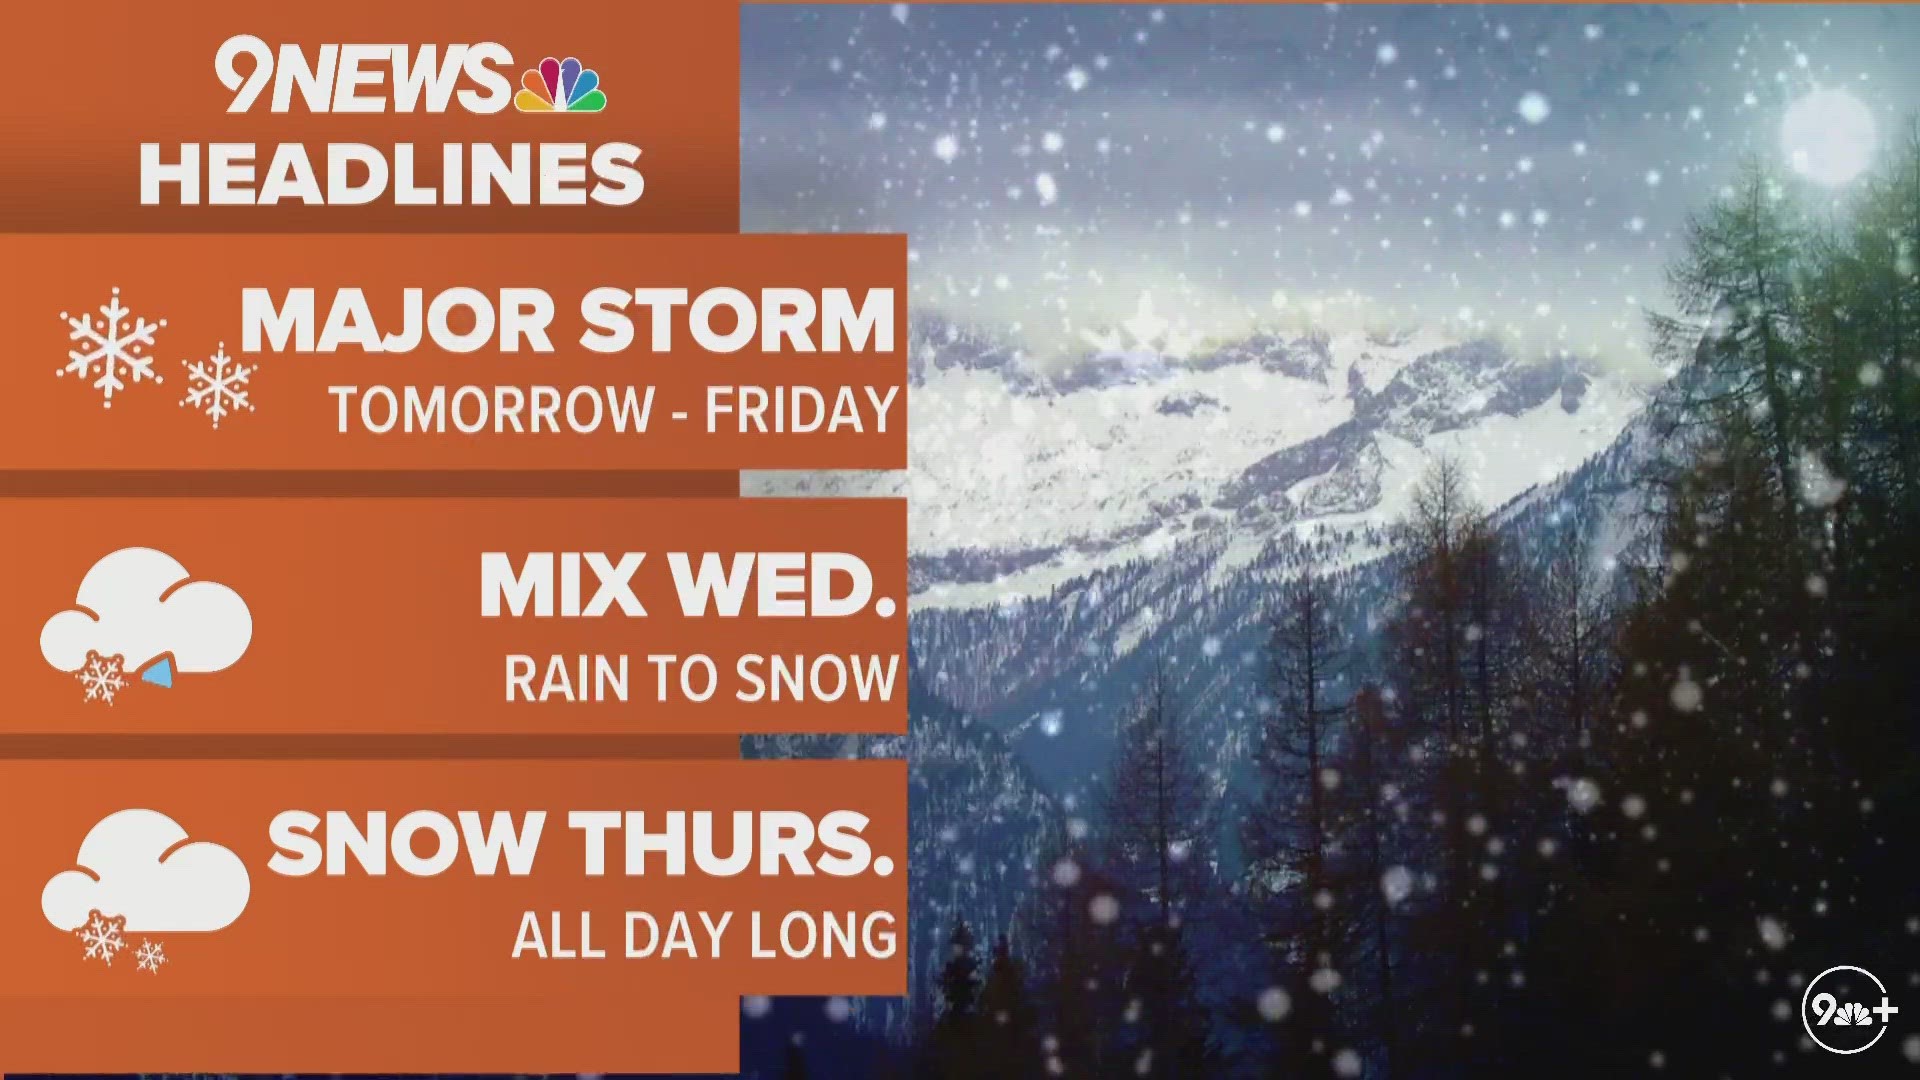 Enjoy the warm temperatures Tuesday ahead of major winter storm that takes aim at Colorado on Wednesday and Thursday.